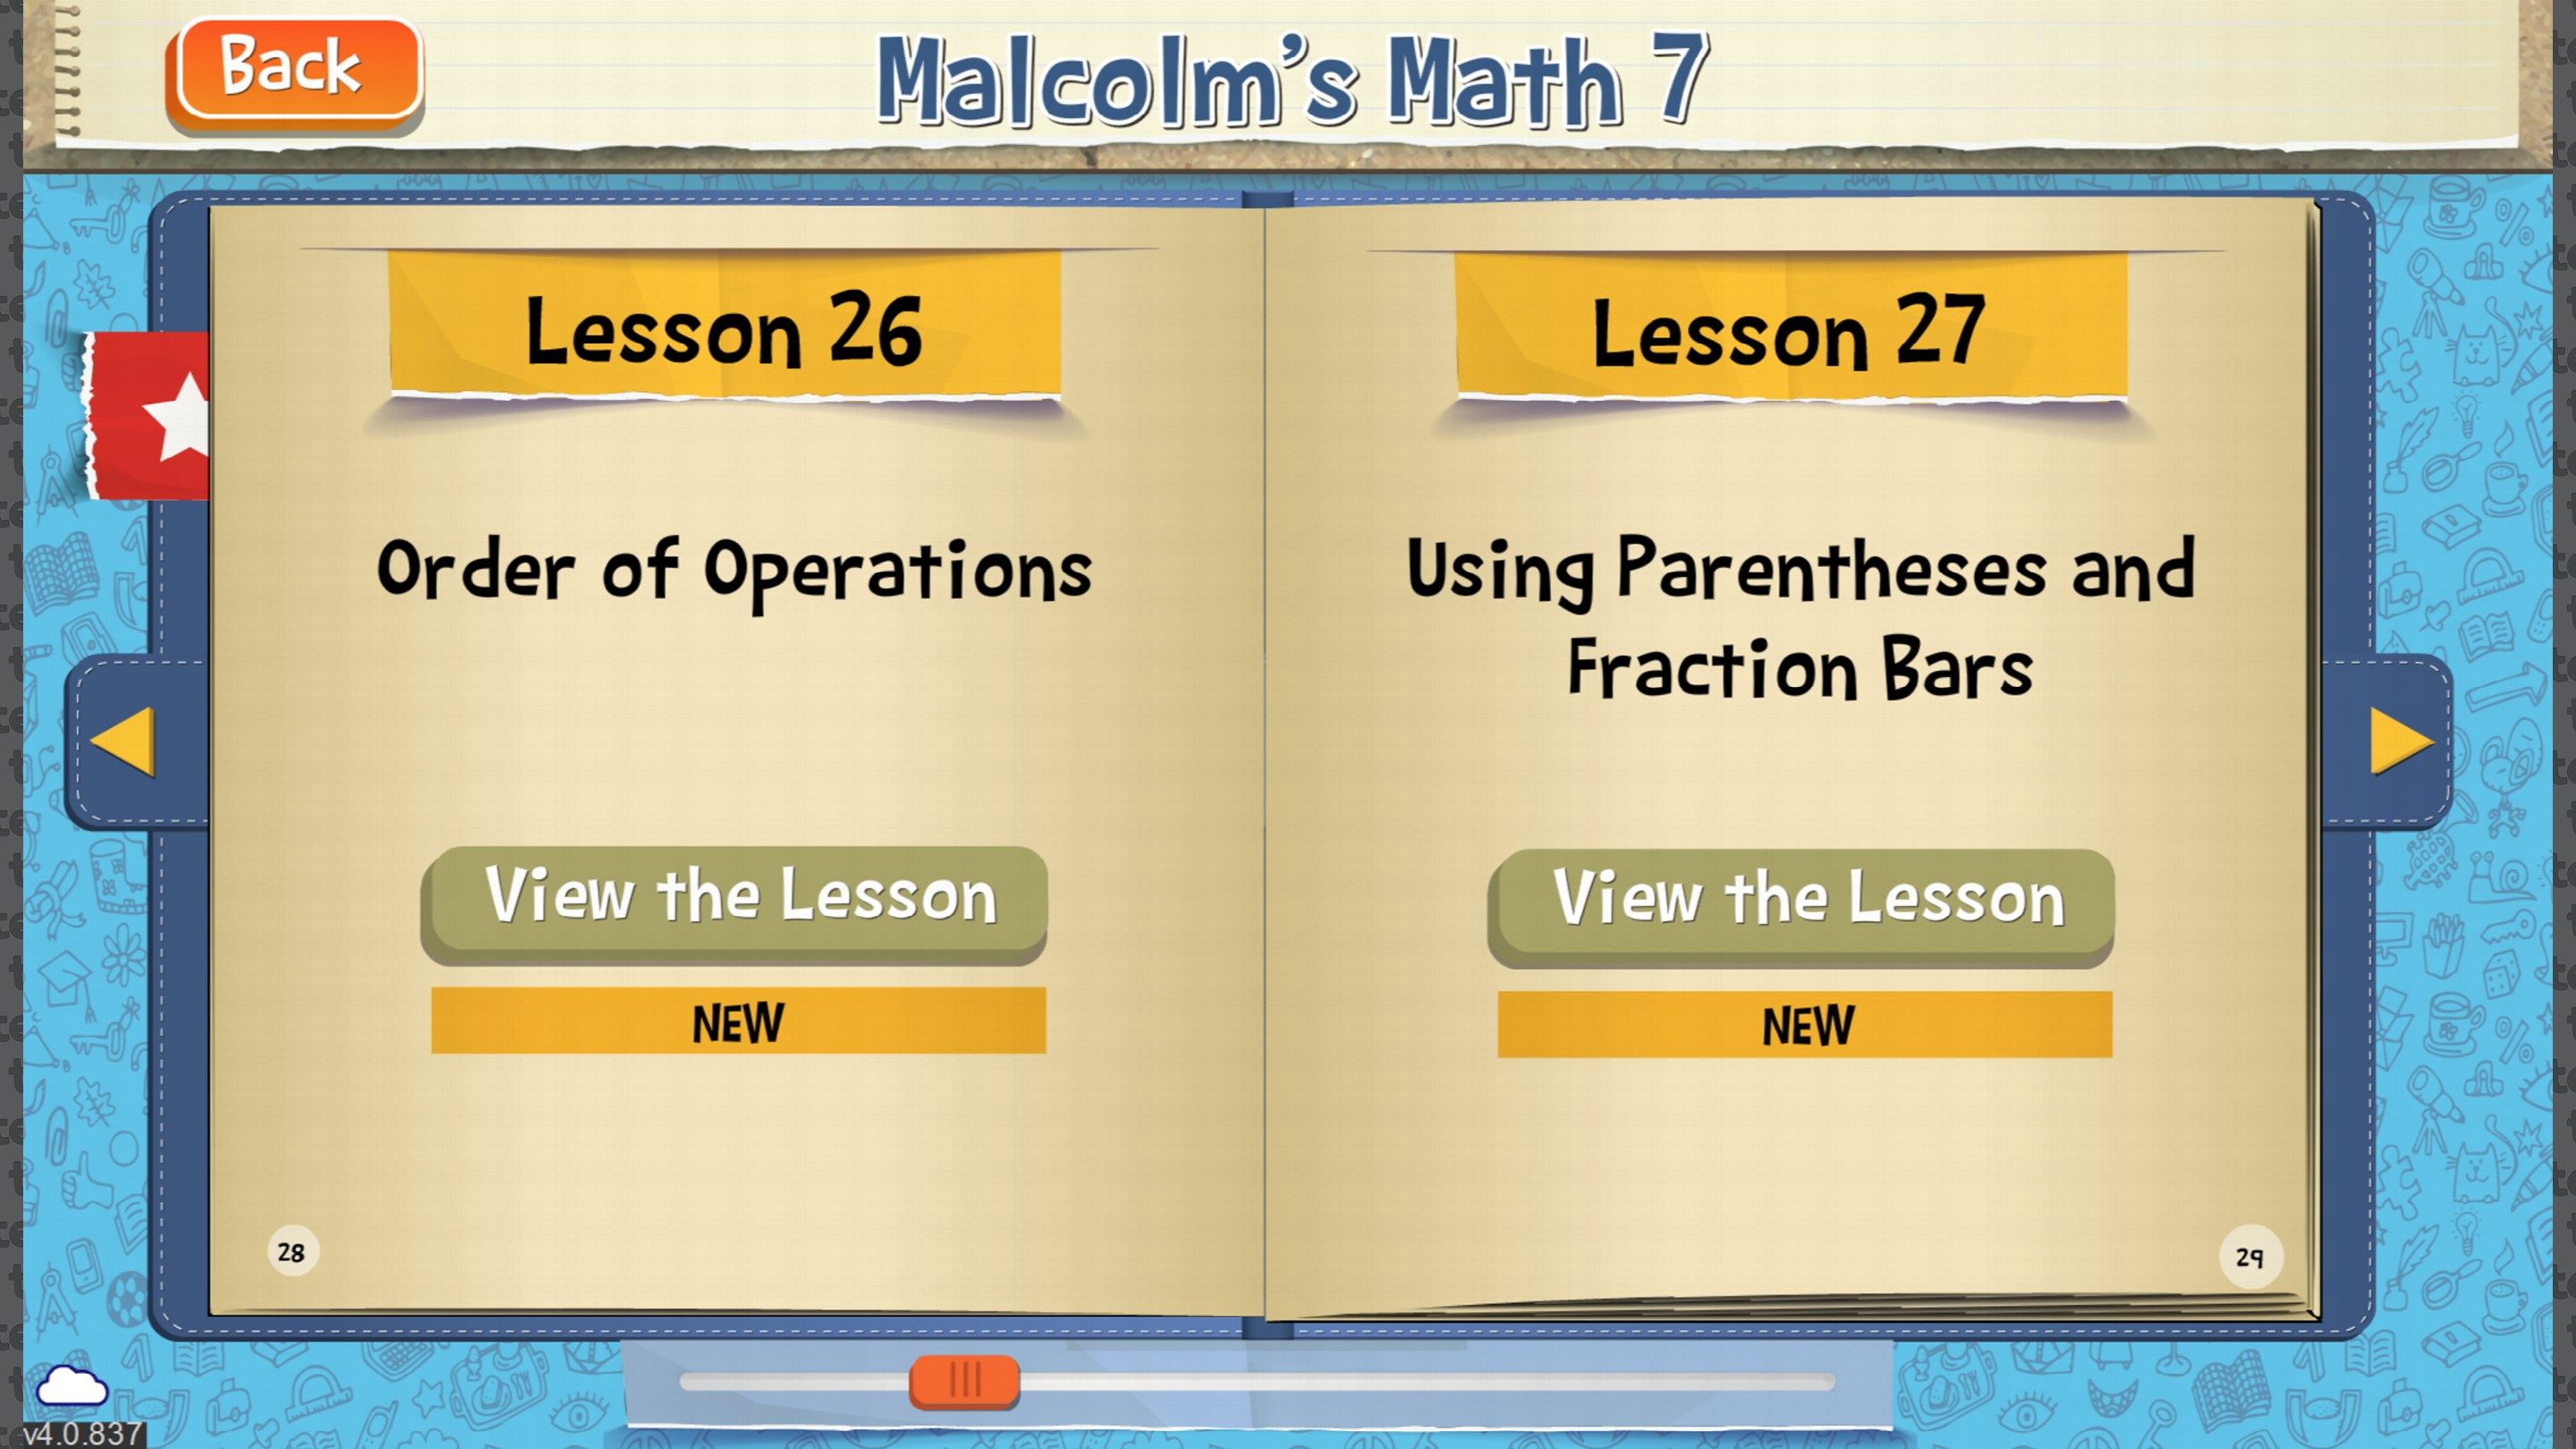 Each lesson covers a core concept with a lecture, and a set of problems to solve.